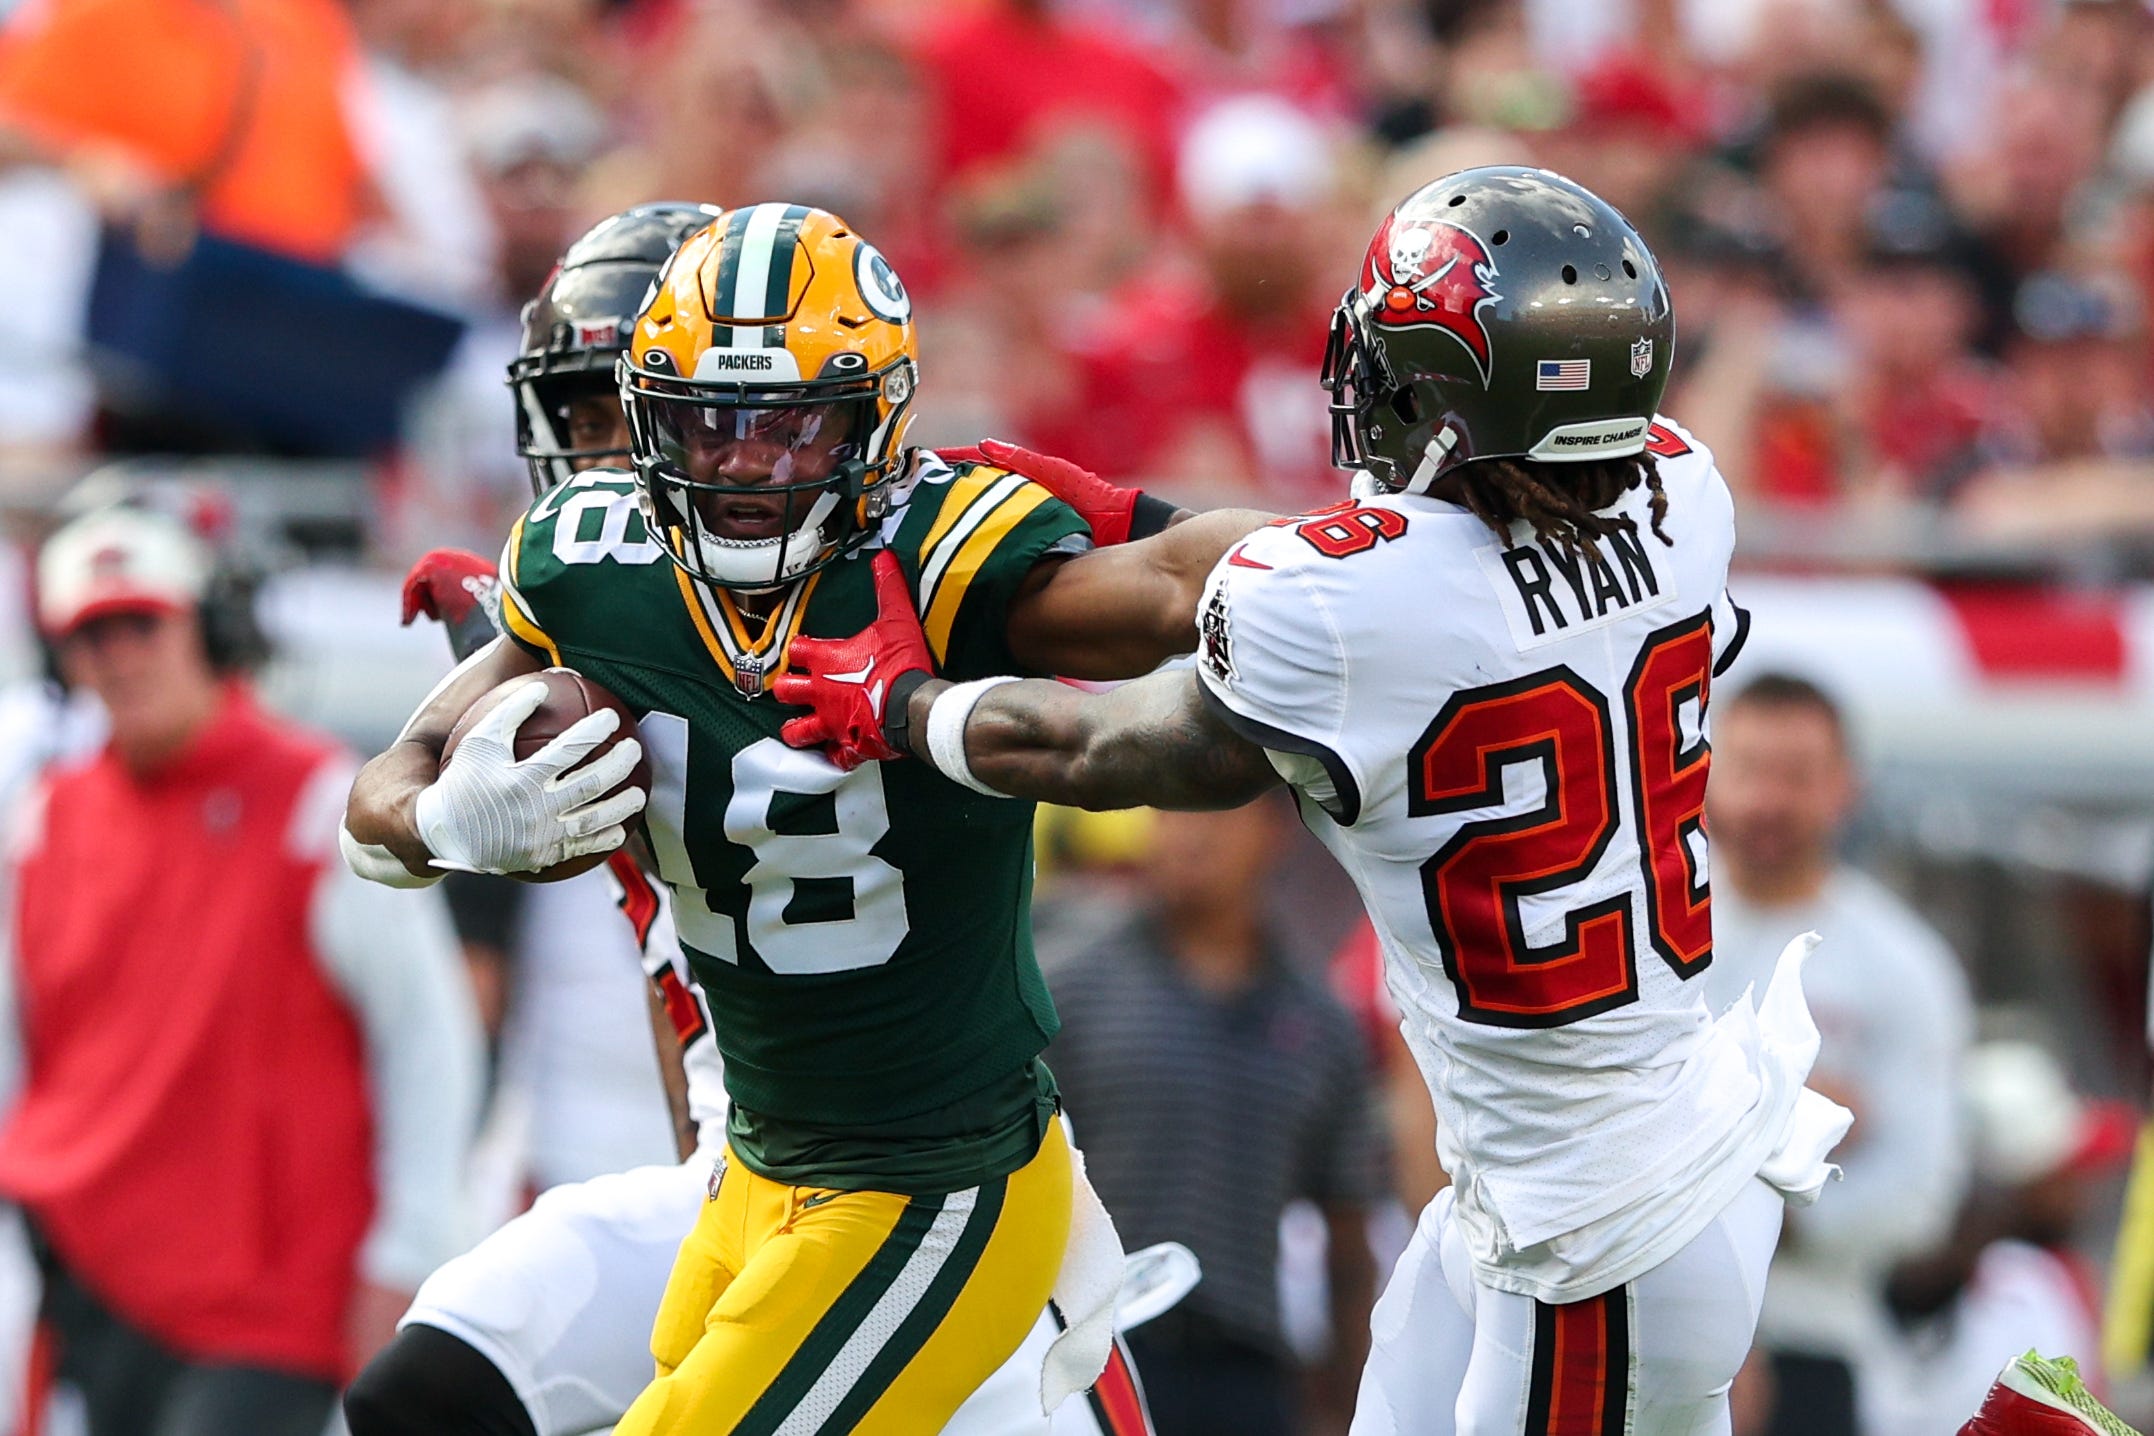 Green Bay Packers wide receiver Randall Cobb (18) stiff arms Tampa Bay Buccaneers safety Logan Ryan (26) in the second quarter at Raymond James Stadium.